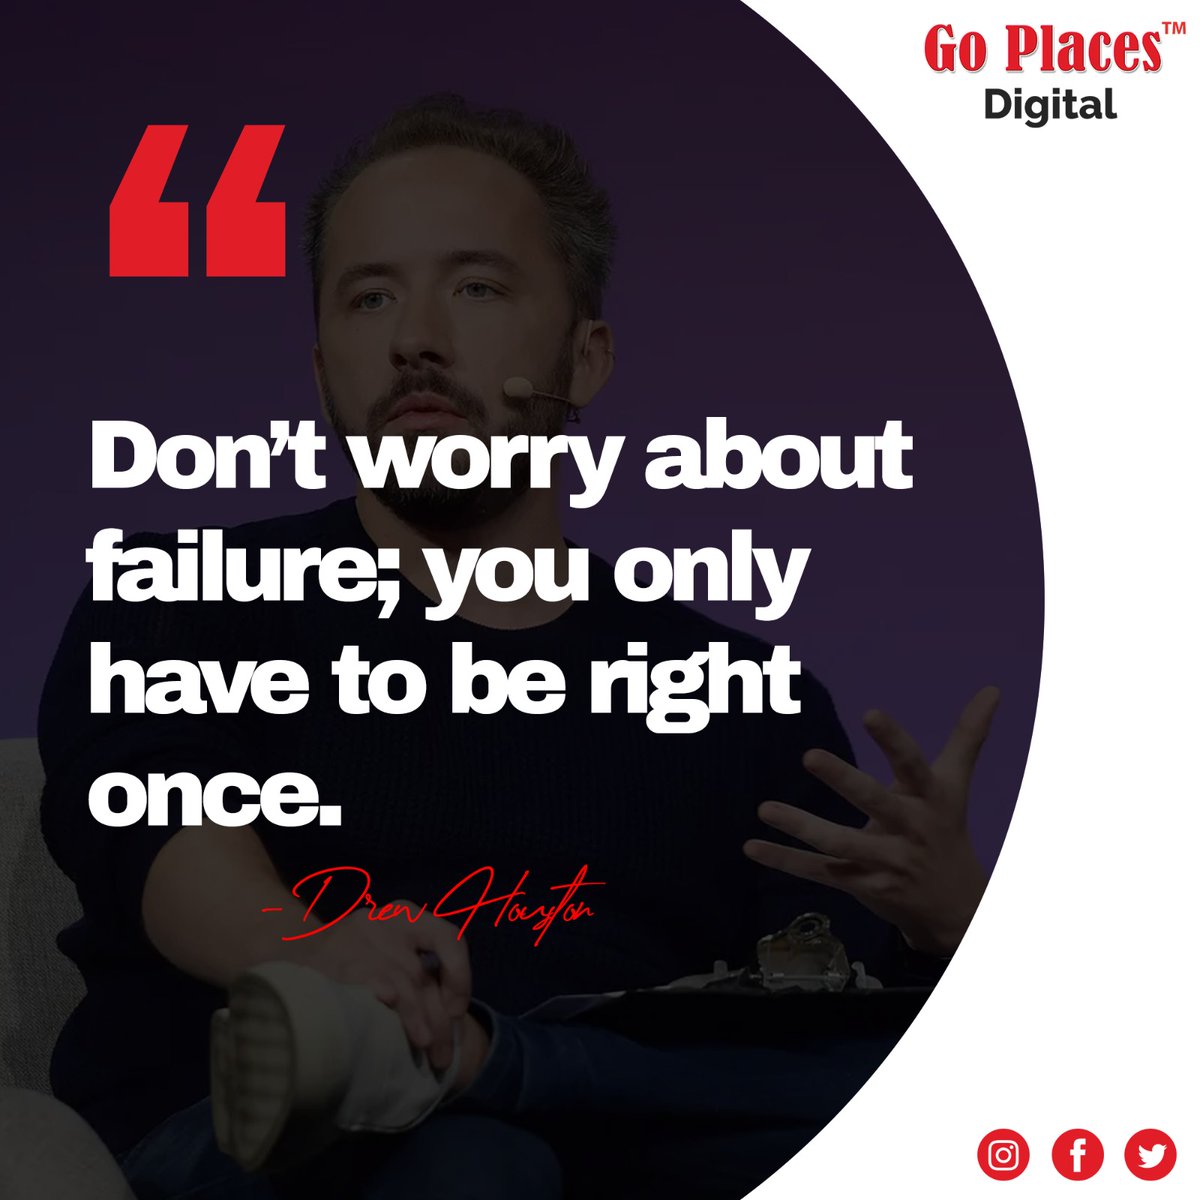 Embrace the Journey😊

One success is all it takes. Keep pushing forward and have an amazing week ahead
To advertise with us 
📞 Call +254 719 764 000
📧 Email:pa-sales@goplacesonline.com
🌐 goplacesdigital.com
#GoPlaces #MarketingGurus #MoneyMondays #MotivationOfTheWeek